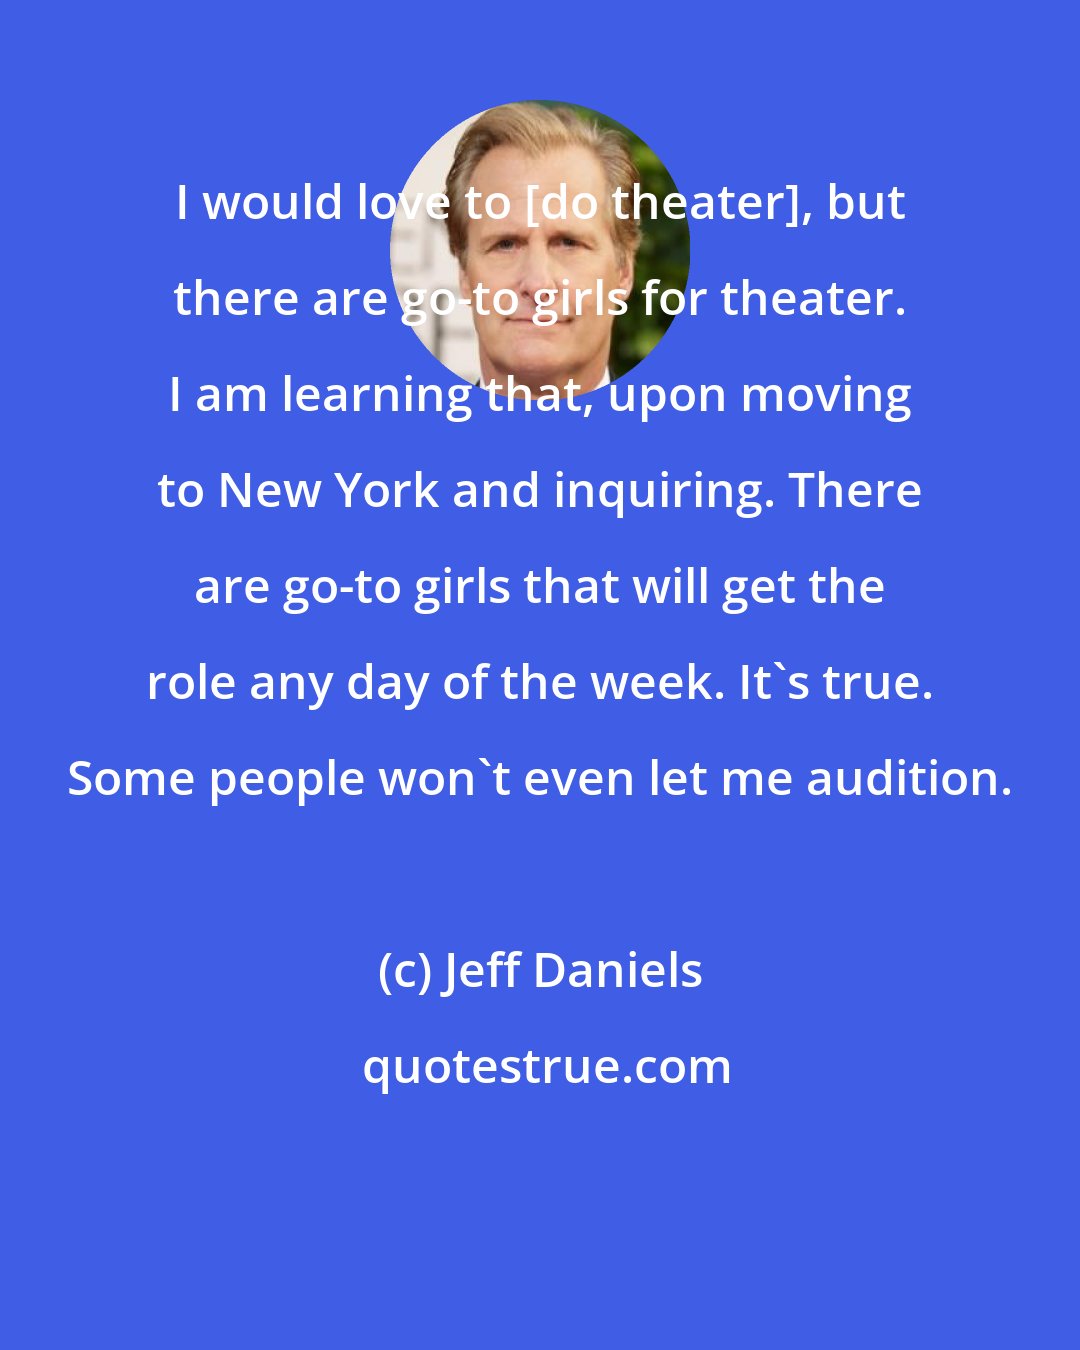 Jeff Daniels: I would love to [do theater], but there are go-to girls for theater. I am learning that, upon moving to New York and inquiring. There are go-to girls that will get the role any day of the week. It's true. Some people won't even let me audition.